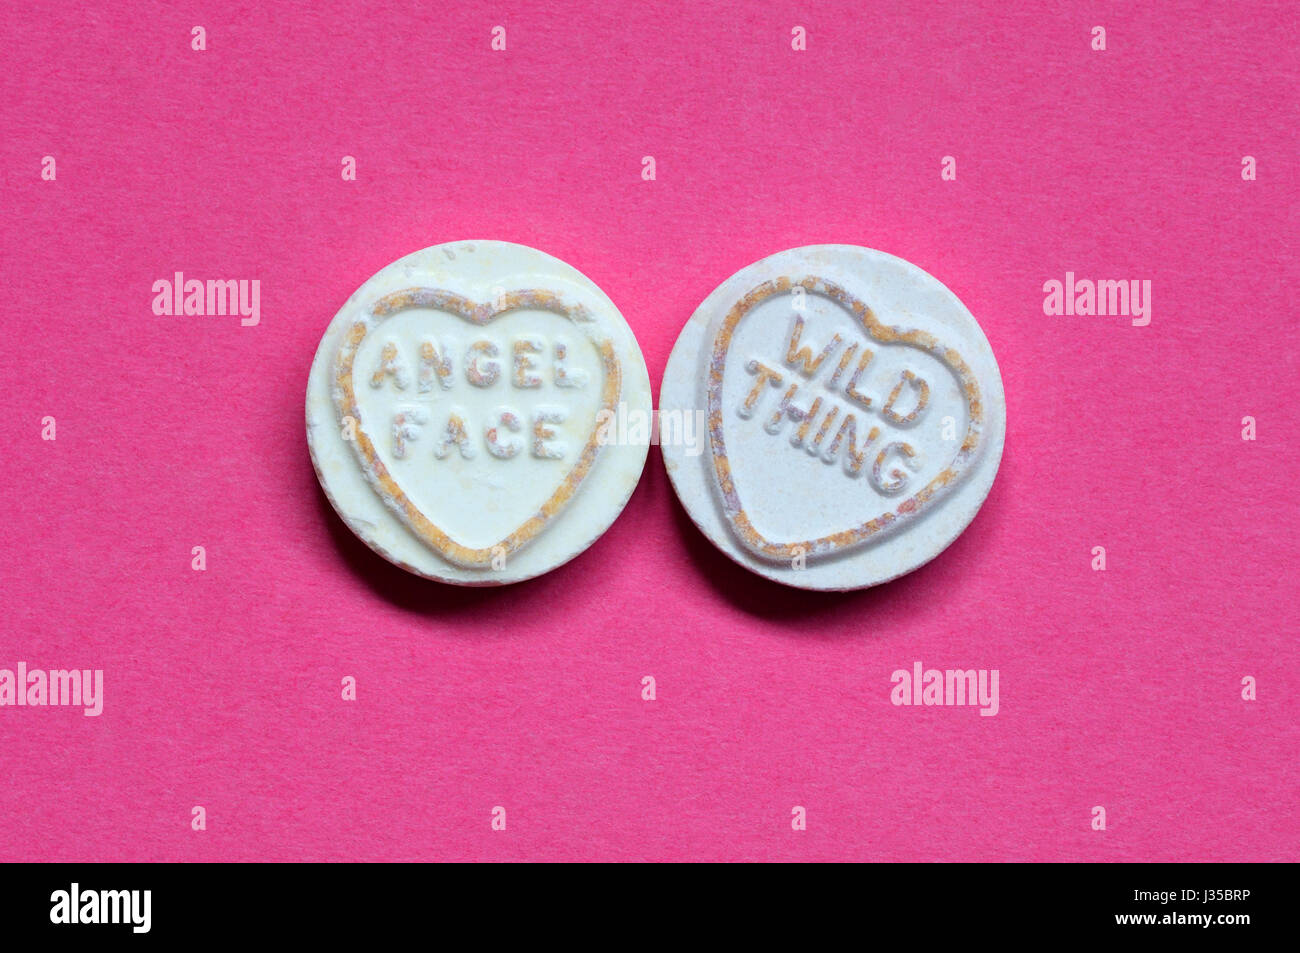 Love Heart Sweets with a conceptual twist. Stock Photo